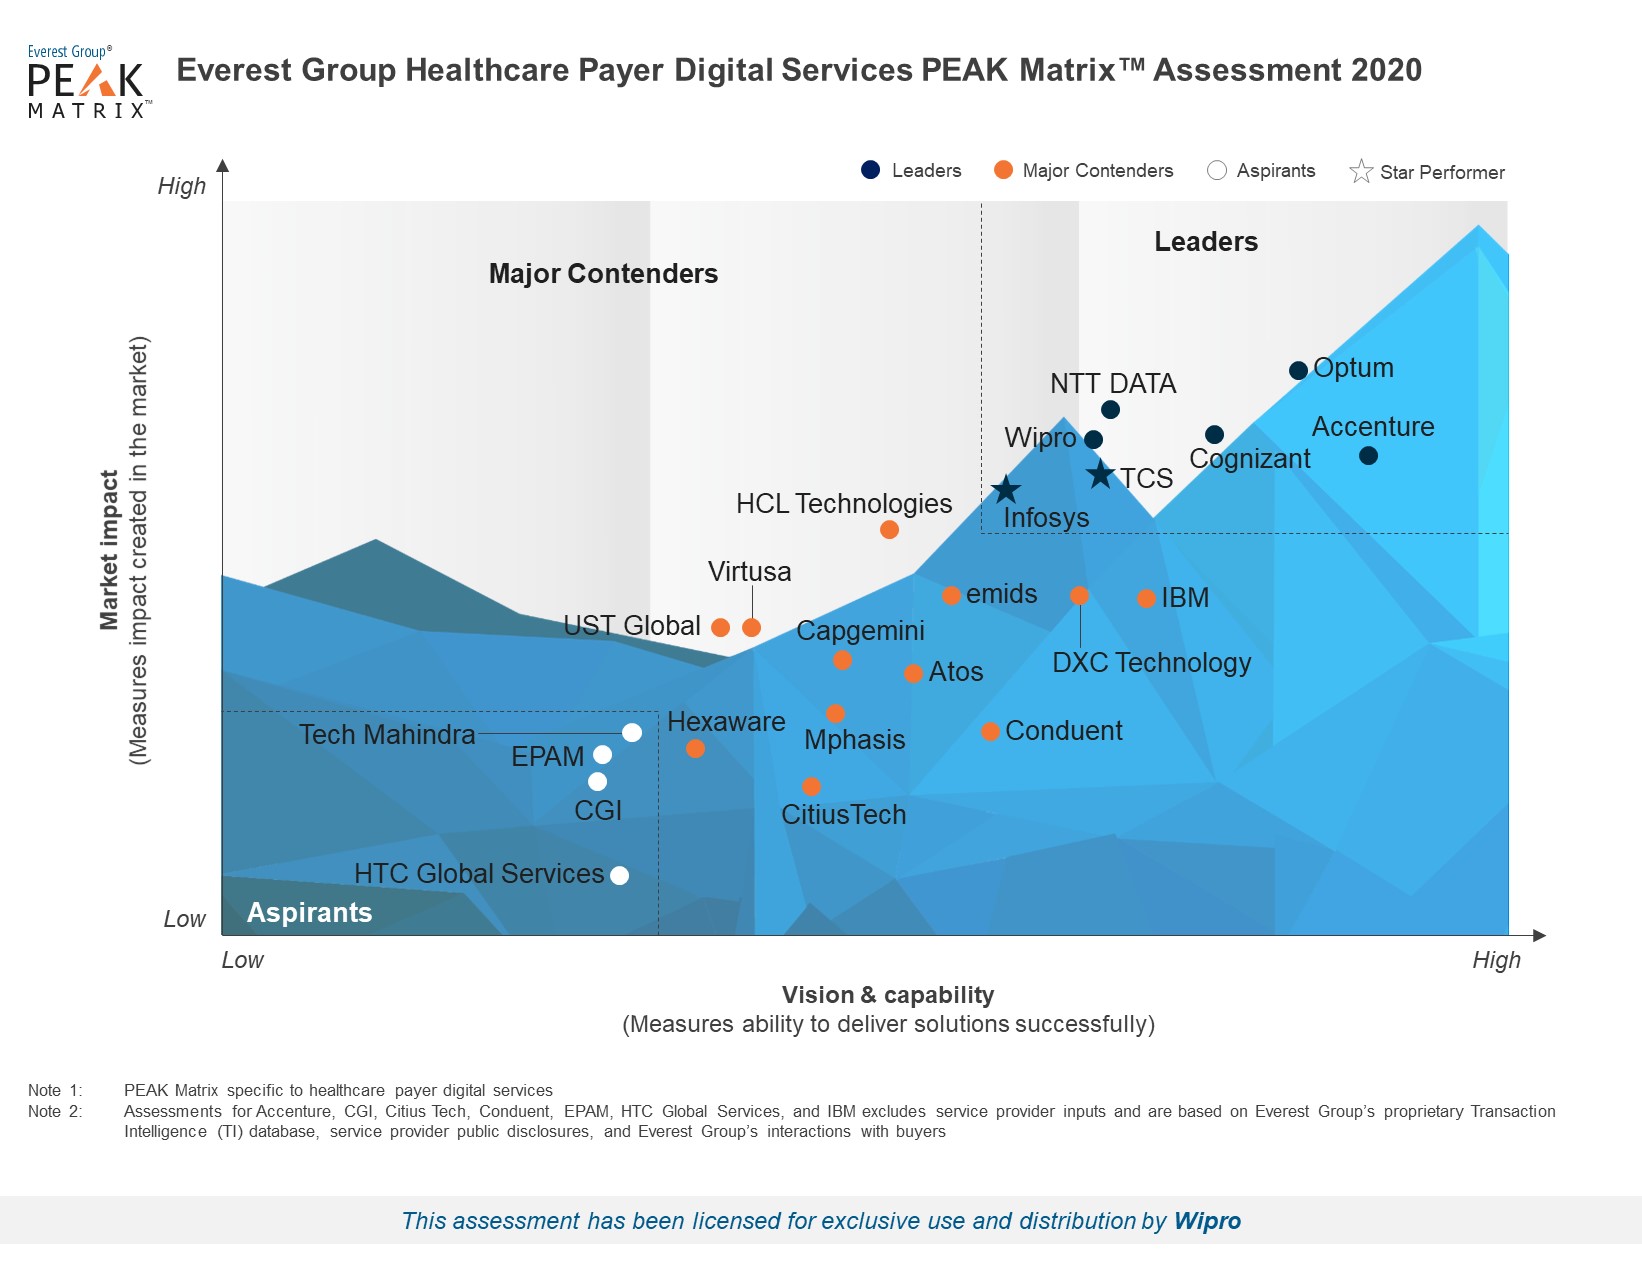 Wipro positioned as a Leader in the Healthcare Payer Digital Service Providers PEAK Matrix Assessment 2020